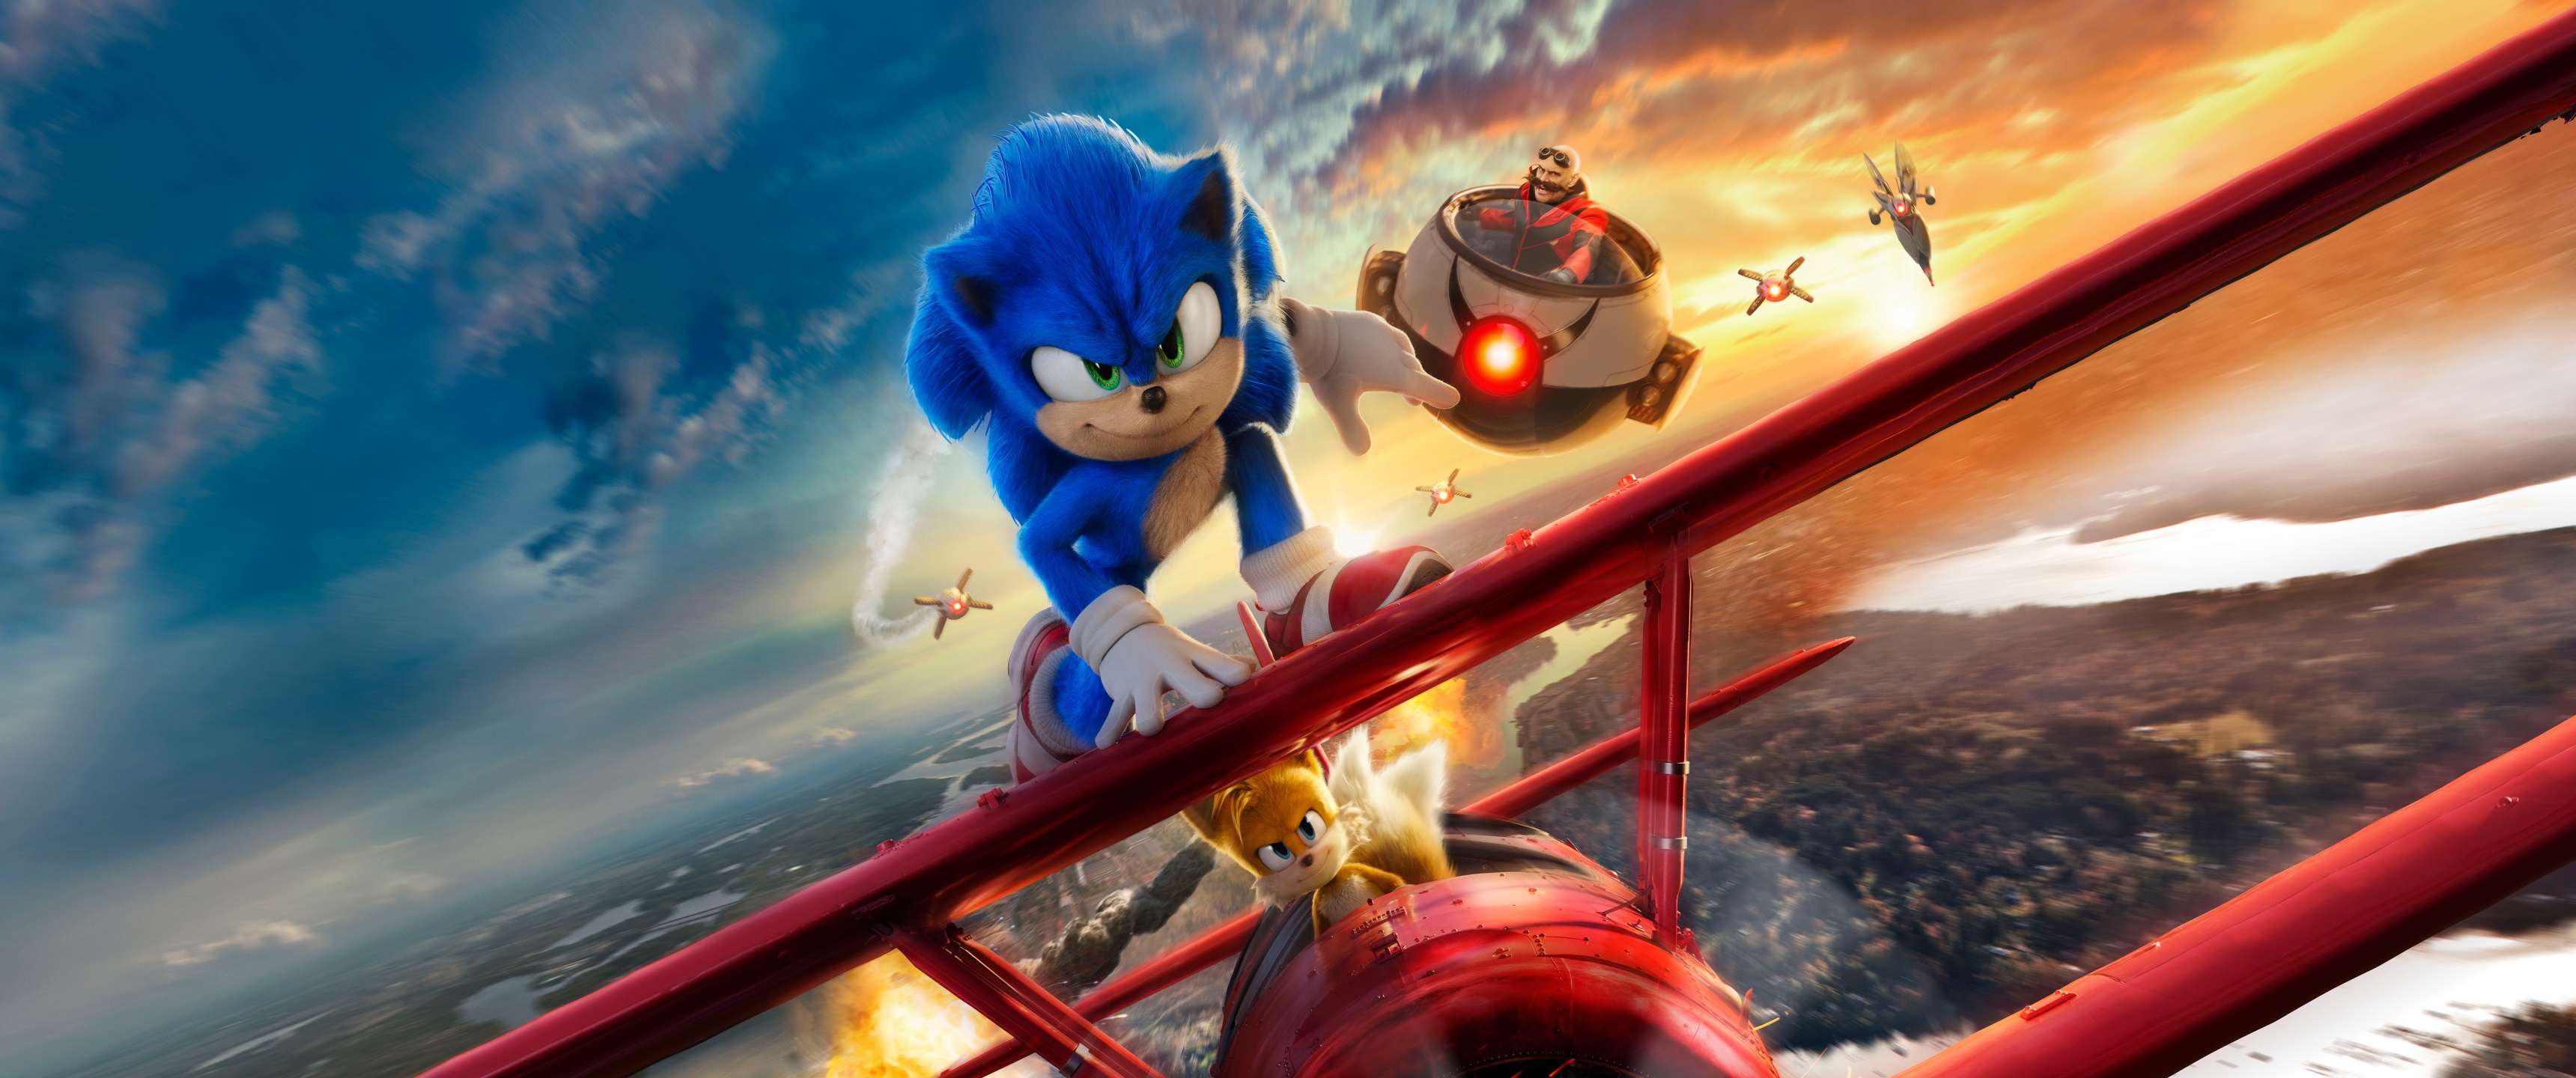 into the sonic verse 4k iPhone X Wallpapers Free Download